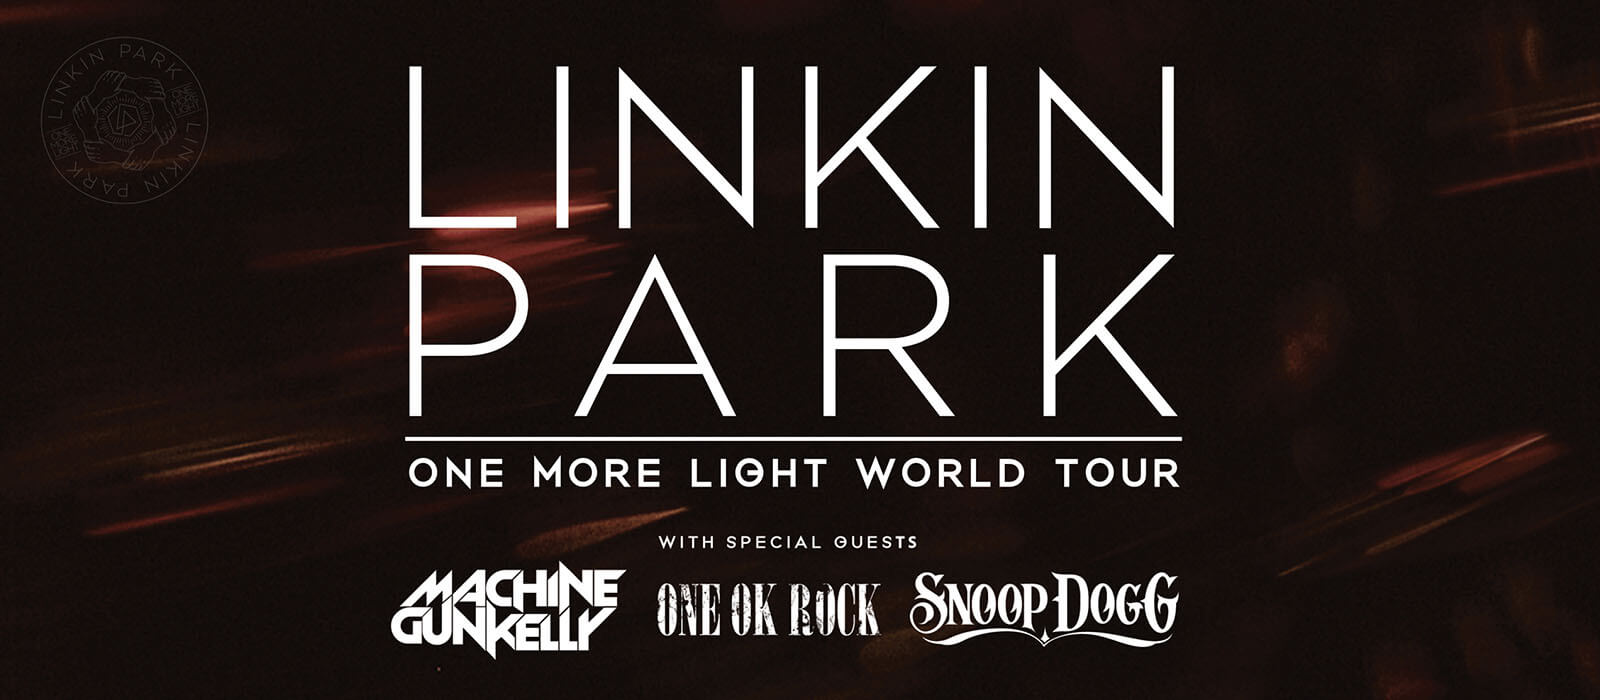 Linkin Park and One OK Rock